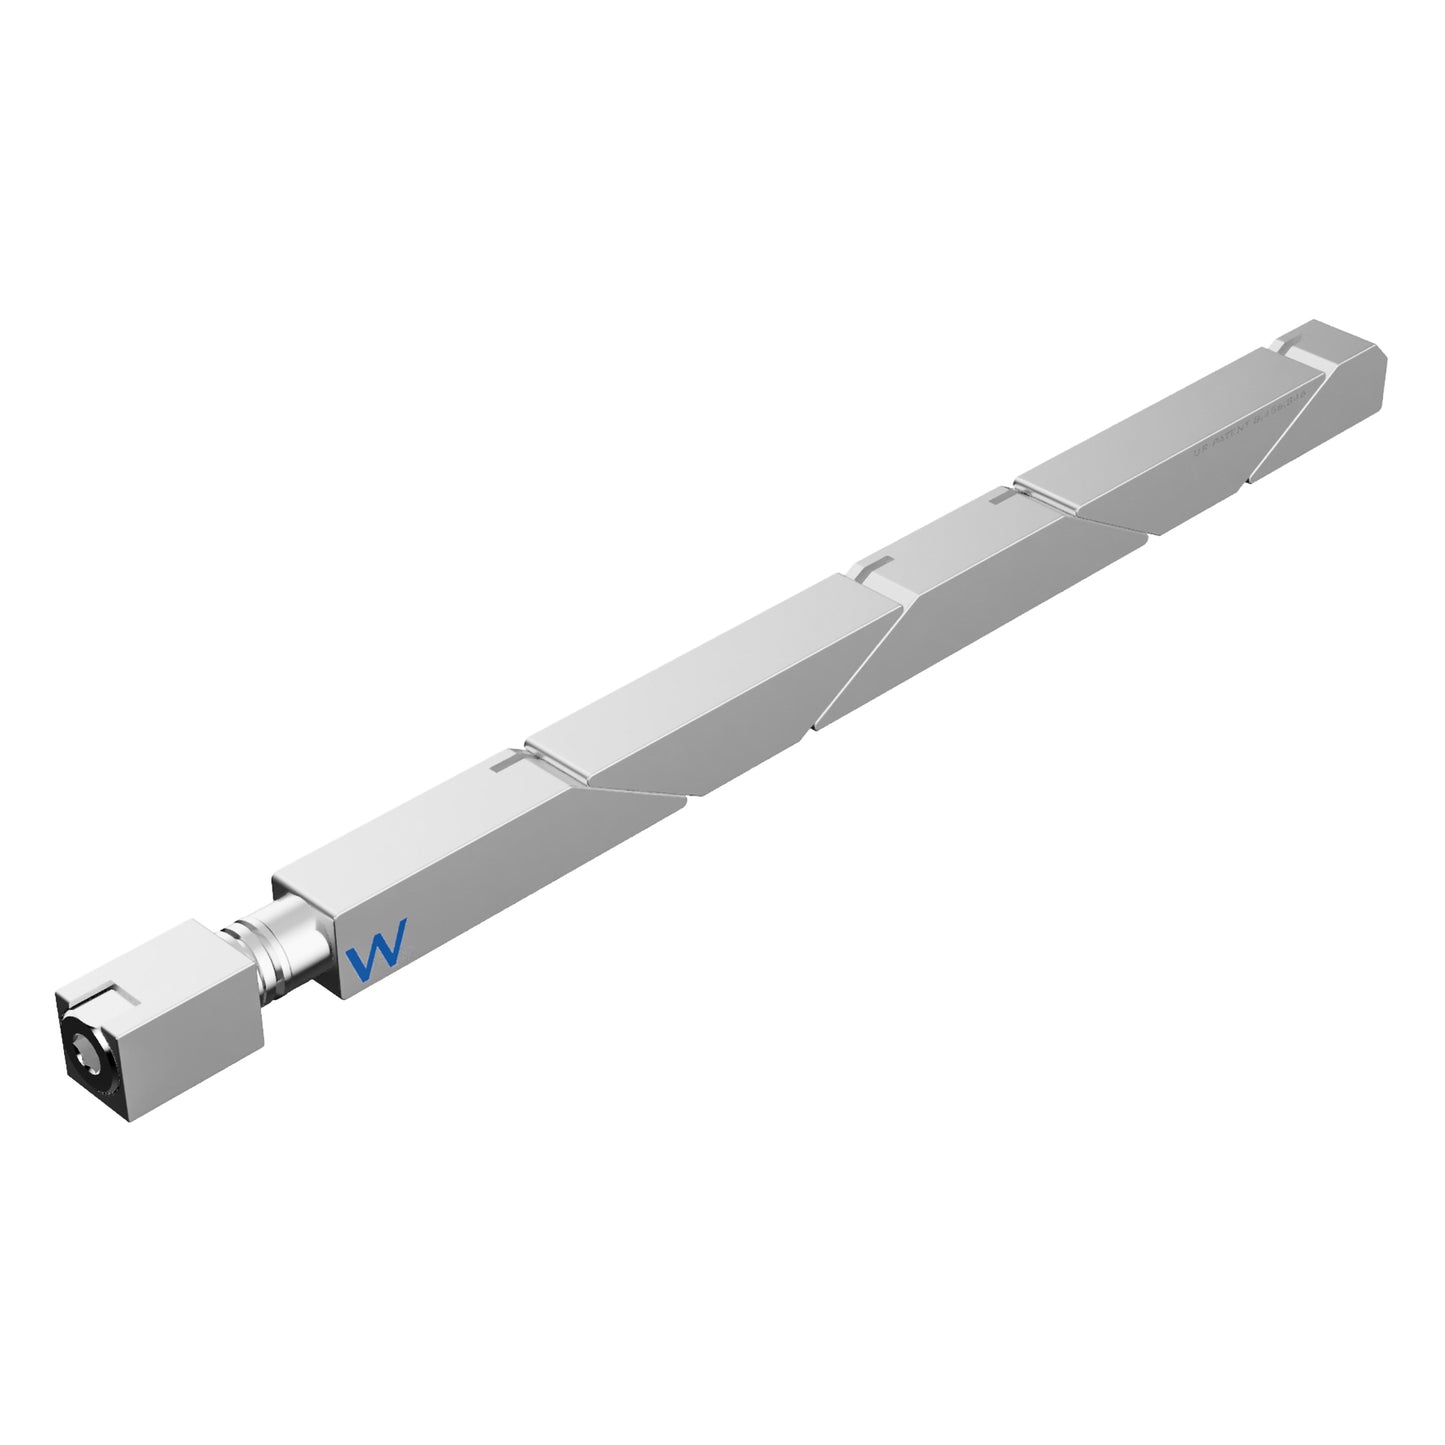 SW5-475-270-250 Max Force Wedgelock, segmented long rectulangular hardware component, Clear Chemical Film Finish